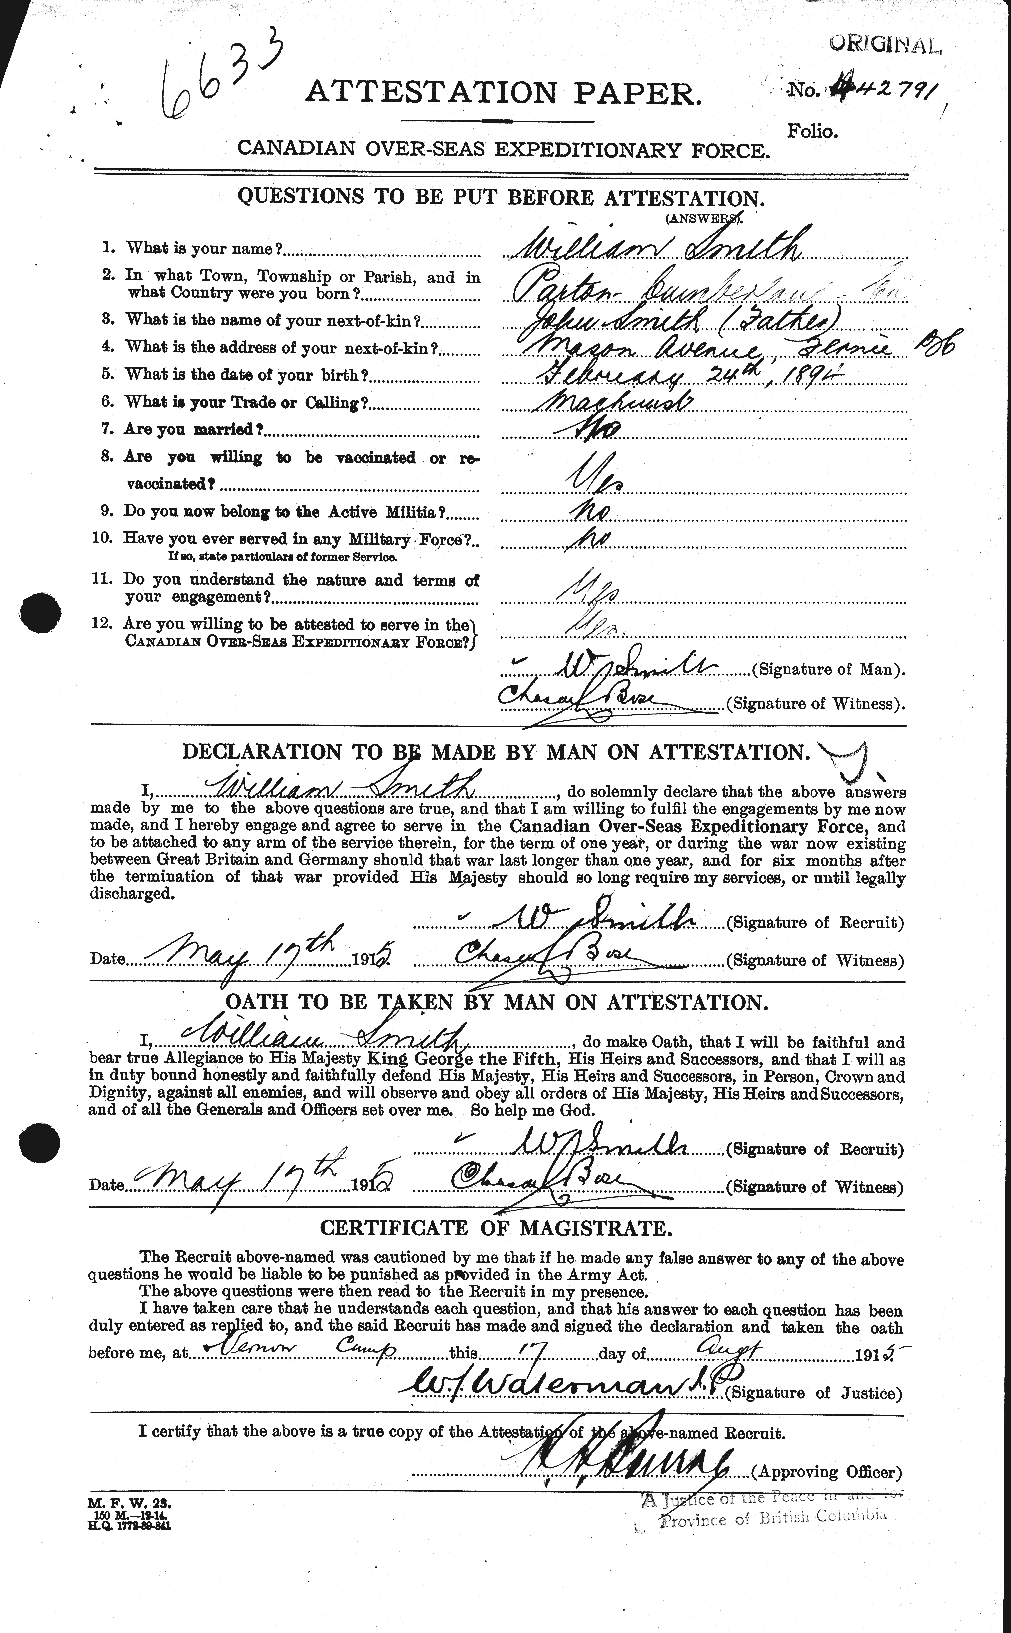 Personnel Records of the First World War - CEF 110898a